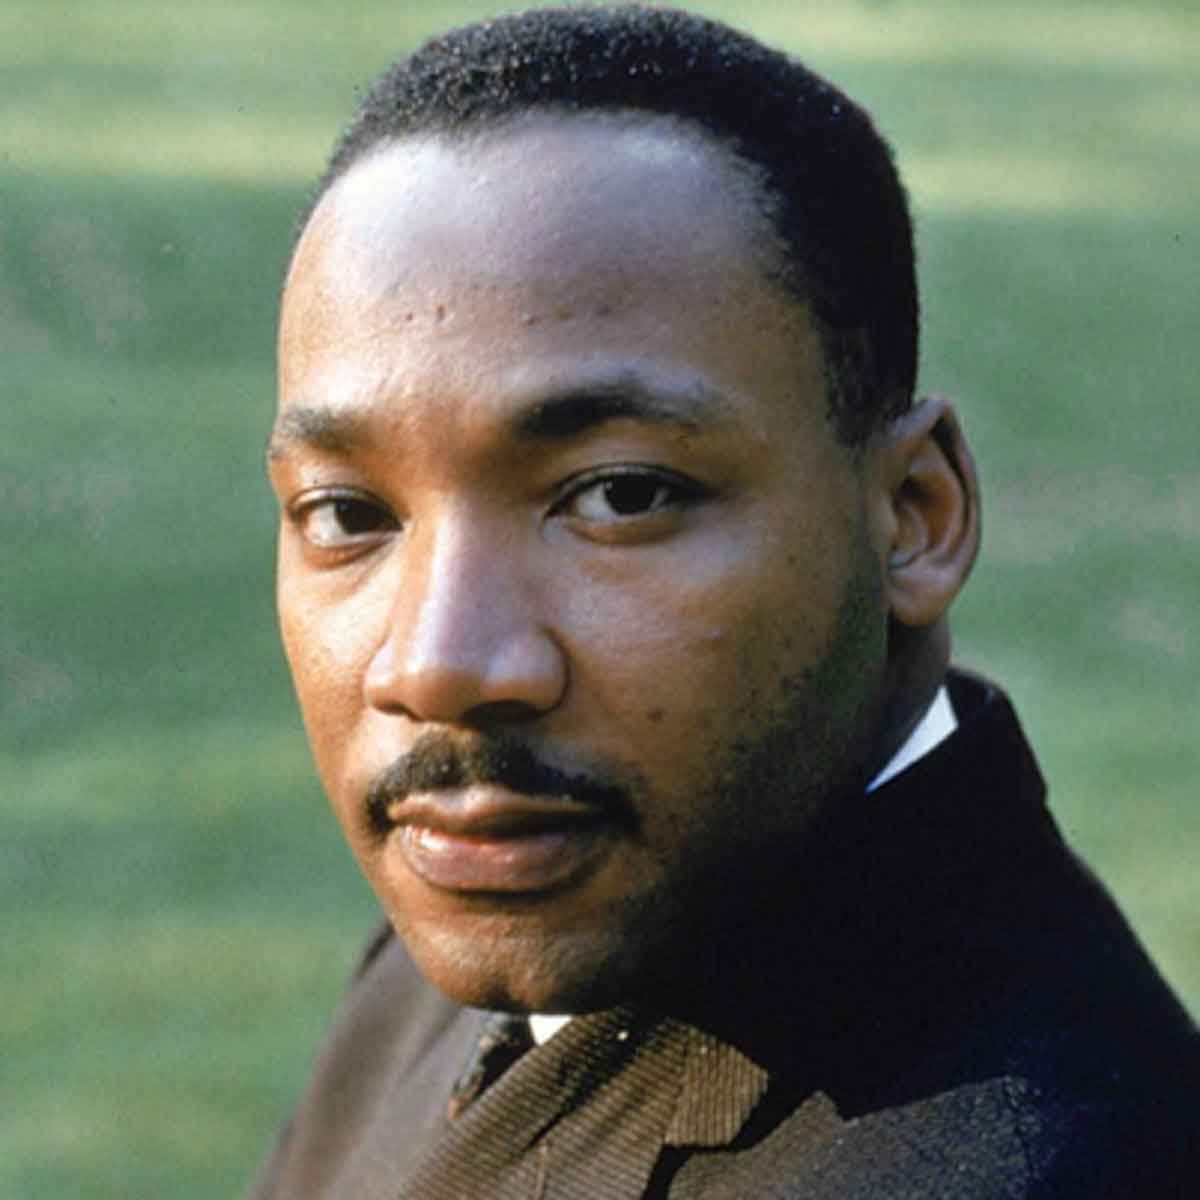 True peace is not merely the absence of tension; it is the presence of  justice. – Martin Luther King, Jr. – Black Mail Blog